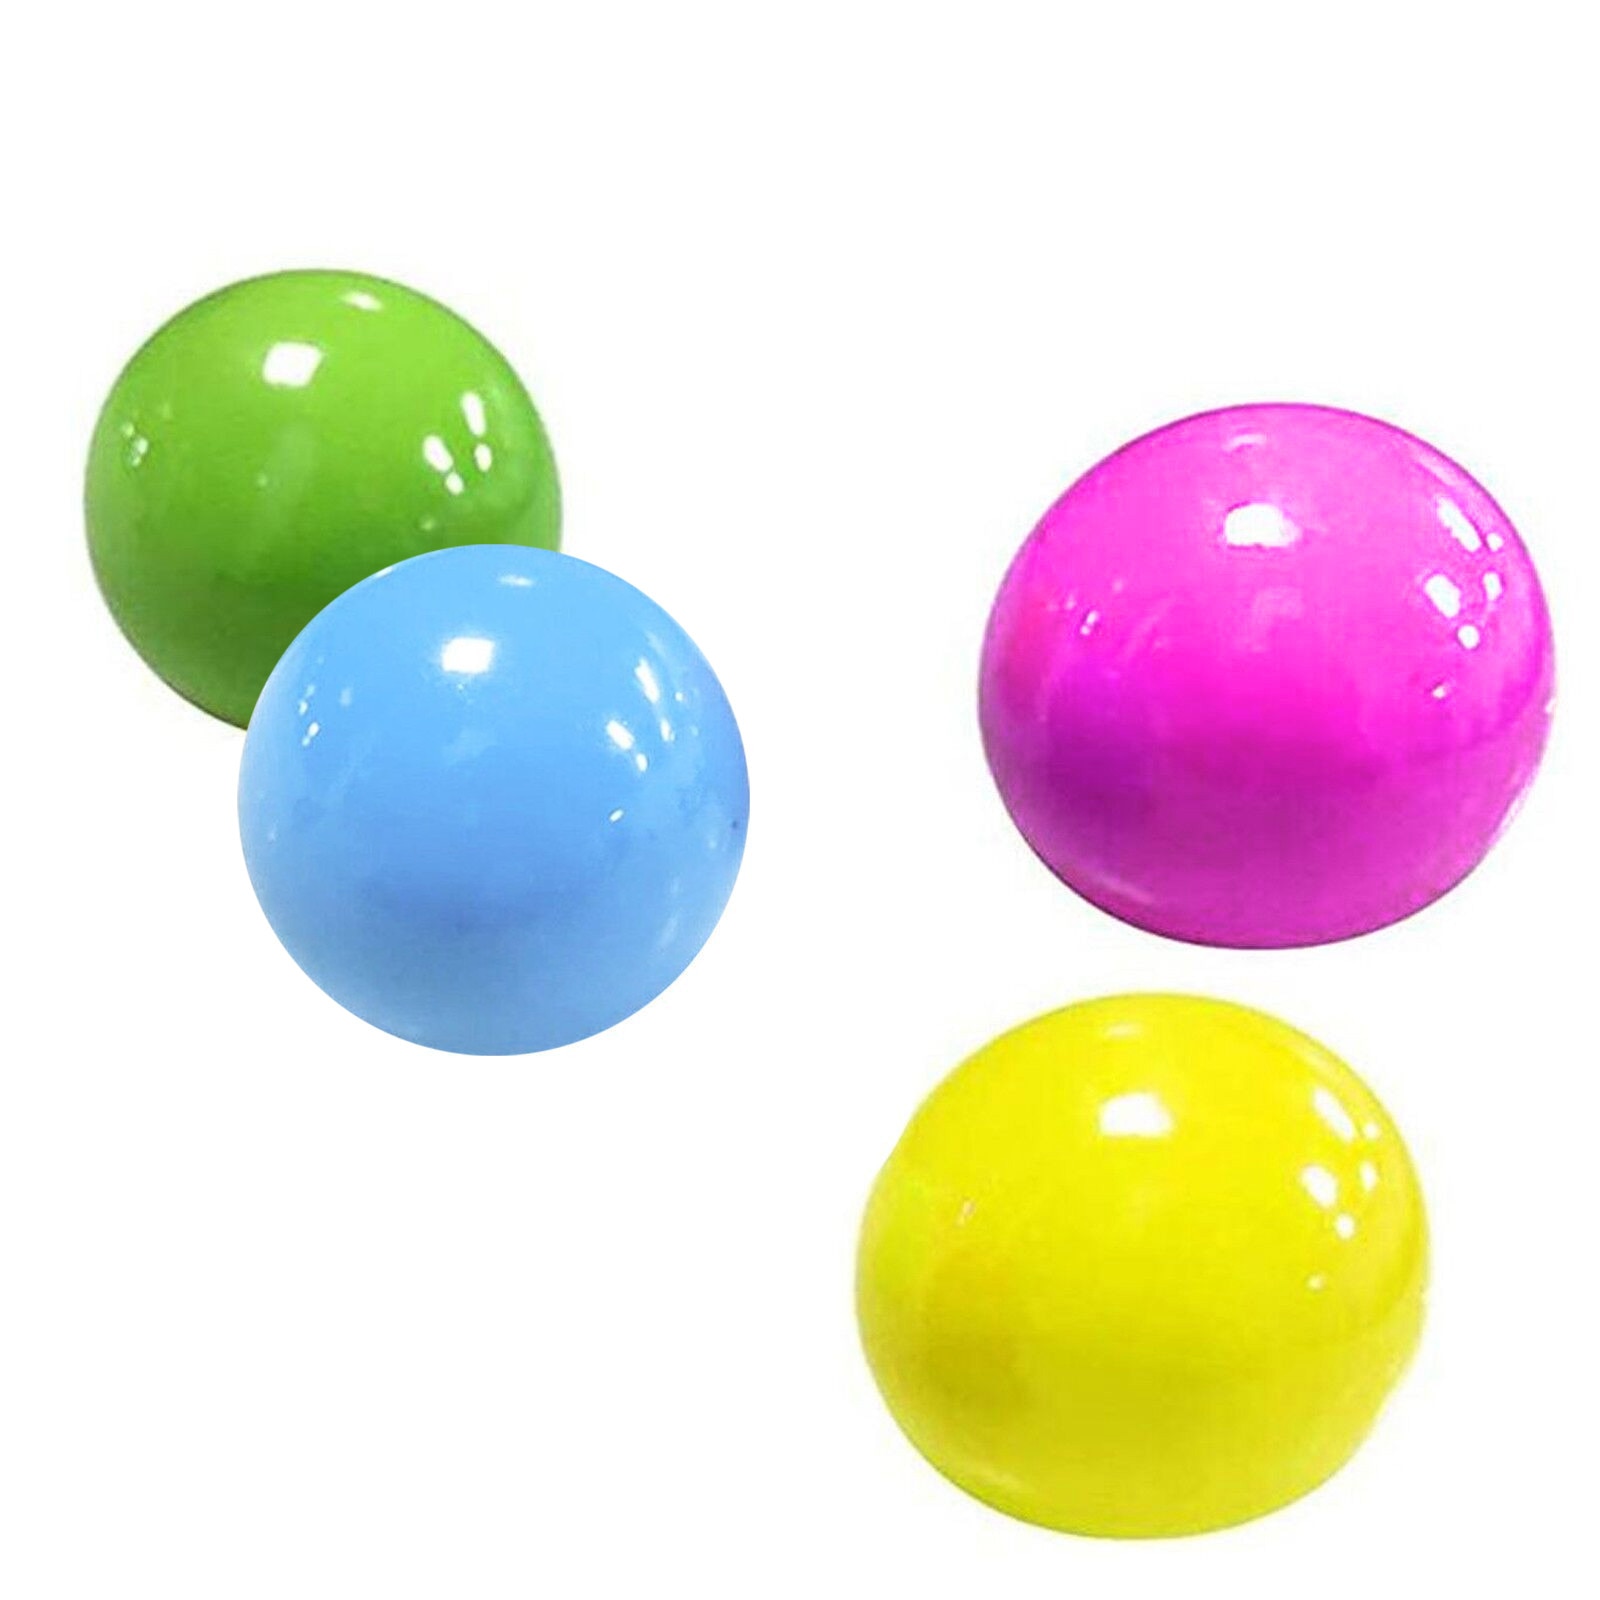 Fluorescent Sticky Wall Ball Sticky Target Ball Decompression Toy Kids Gift 10ml Squeeze Relief Anti-stress Kids Funny Gifts#40